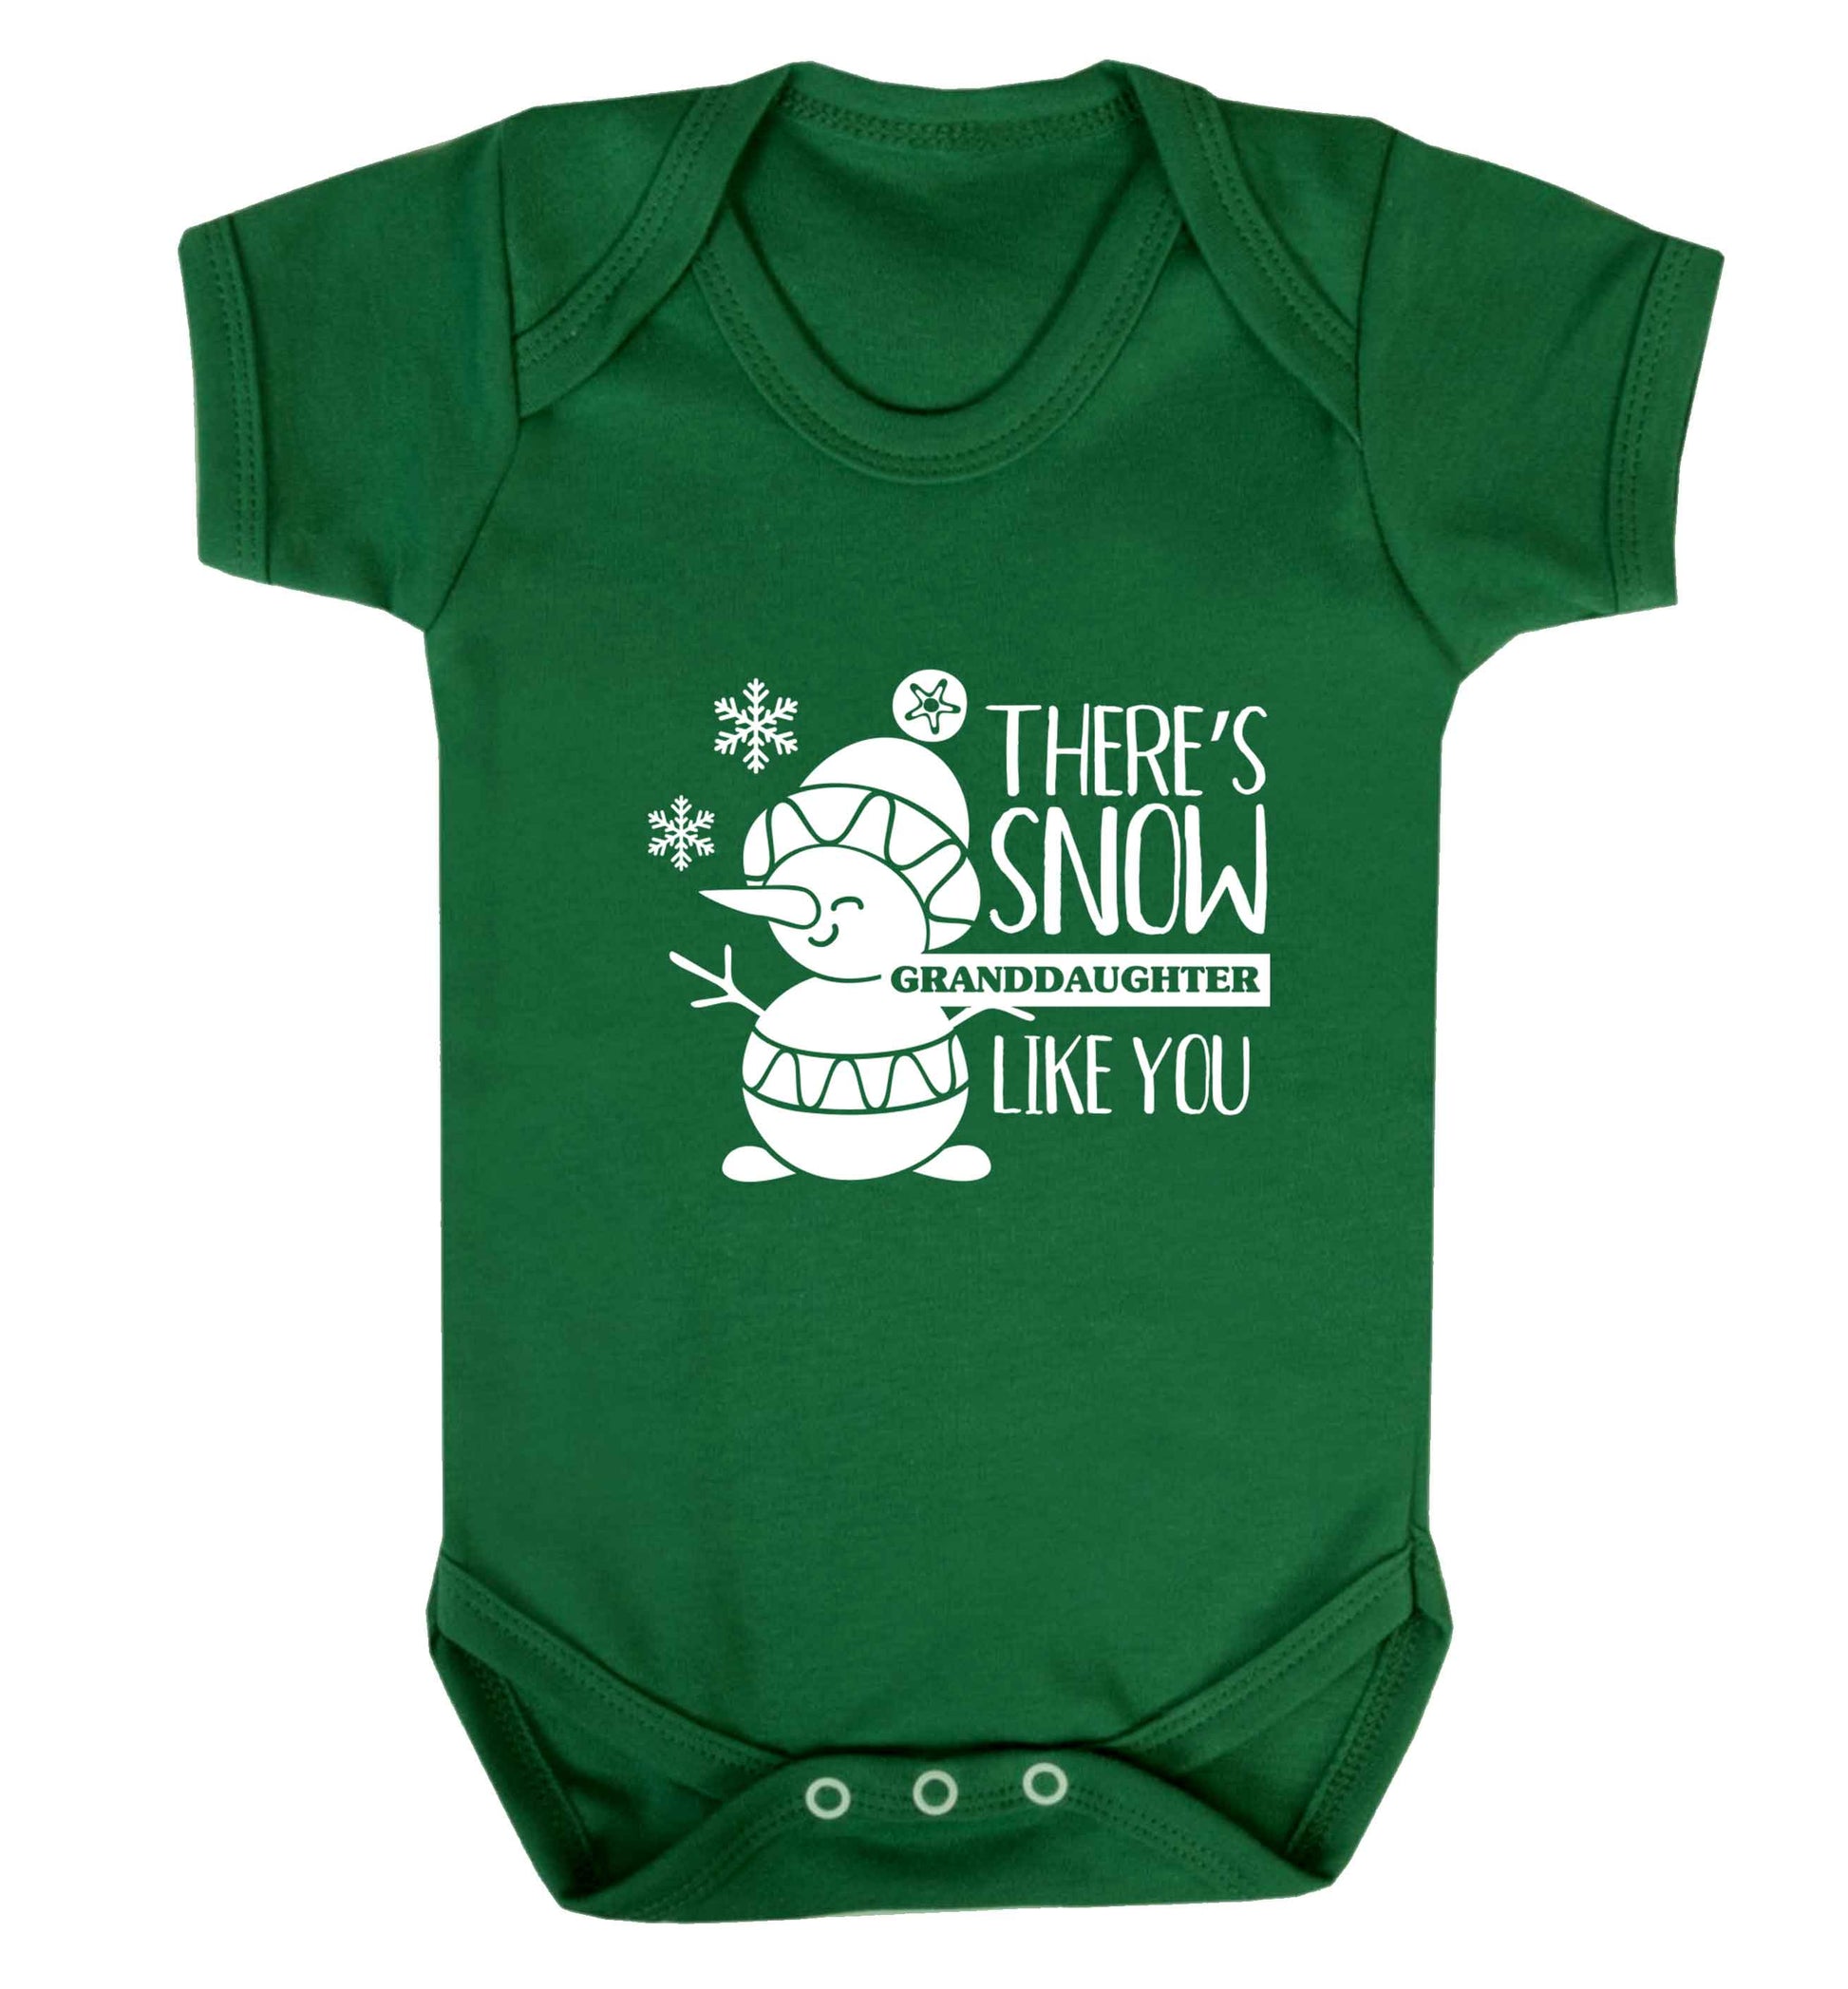 There's snow granddaughter like you baby vest green 18-24 months